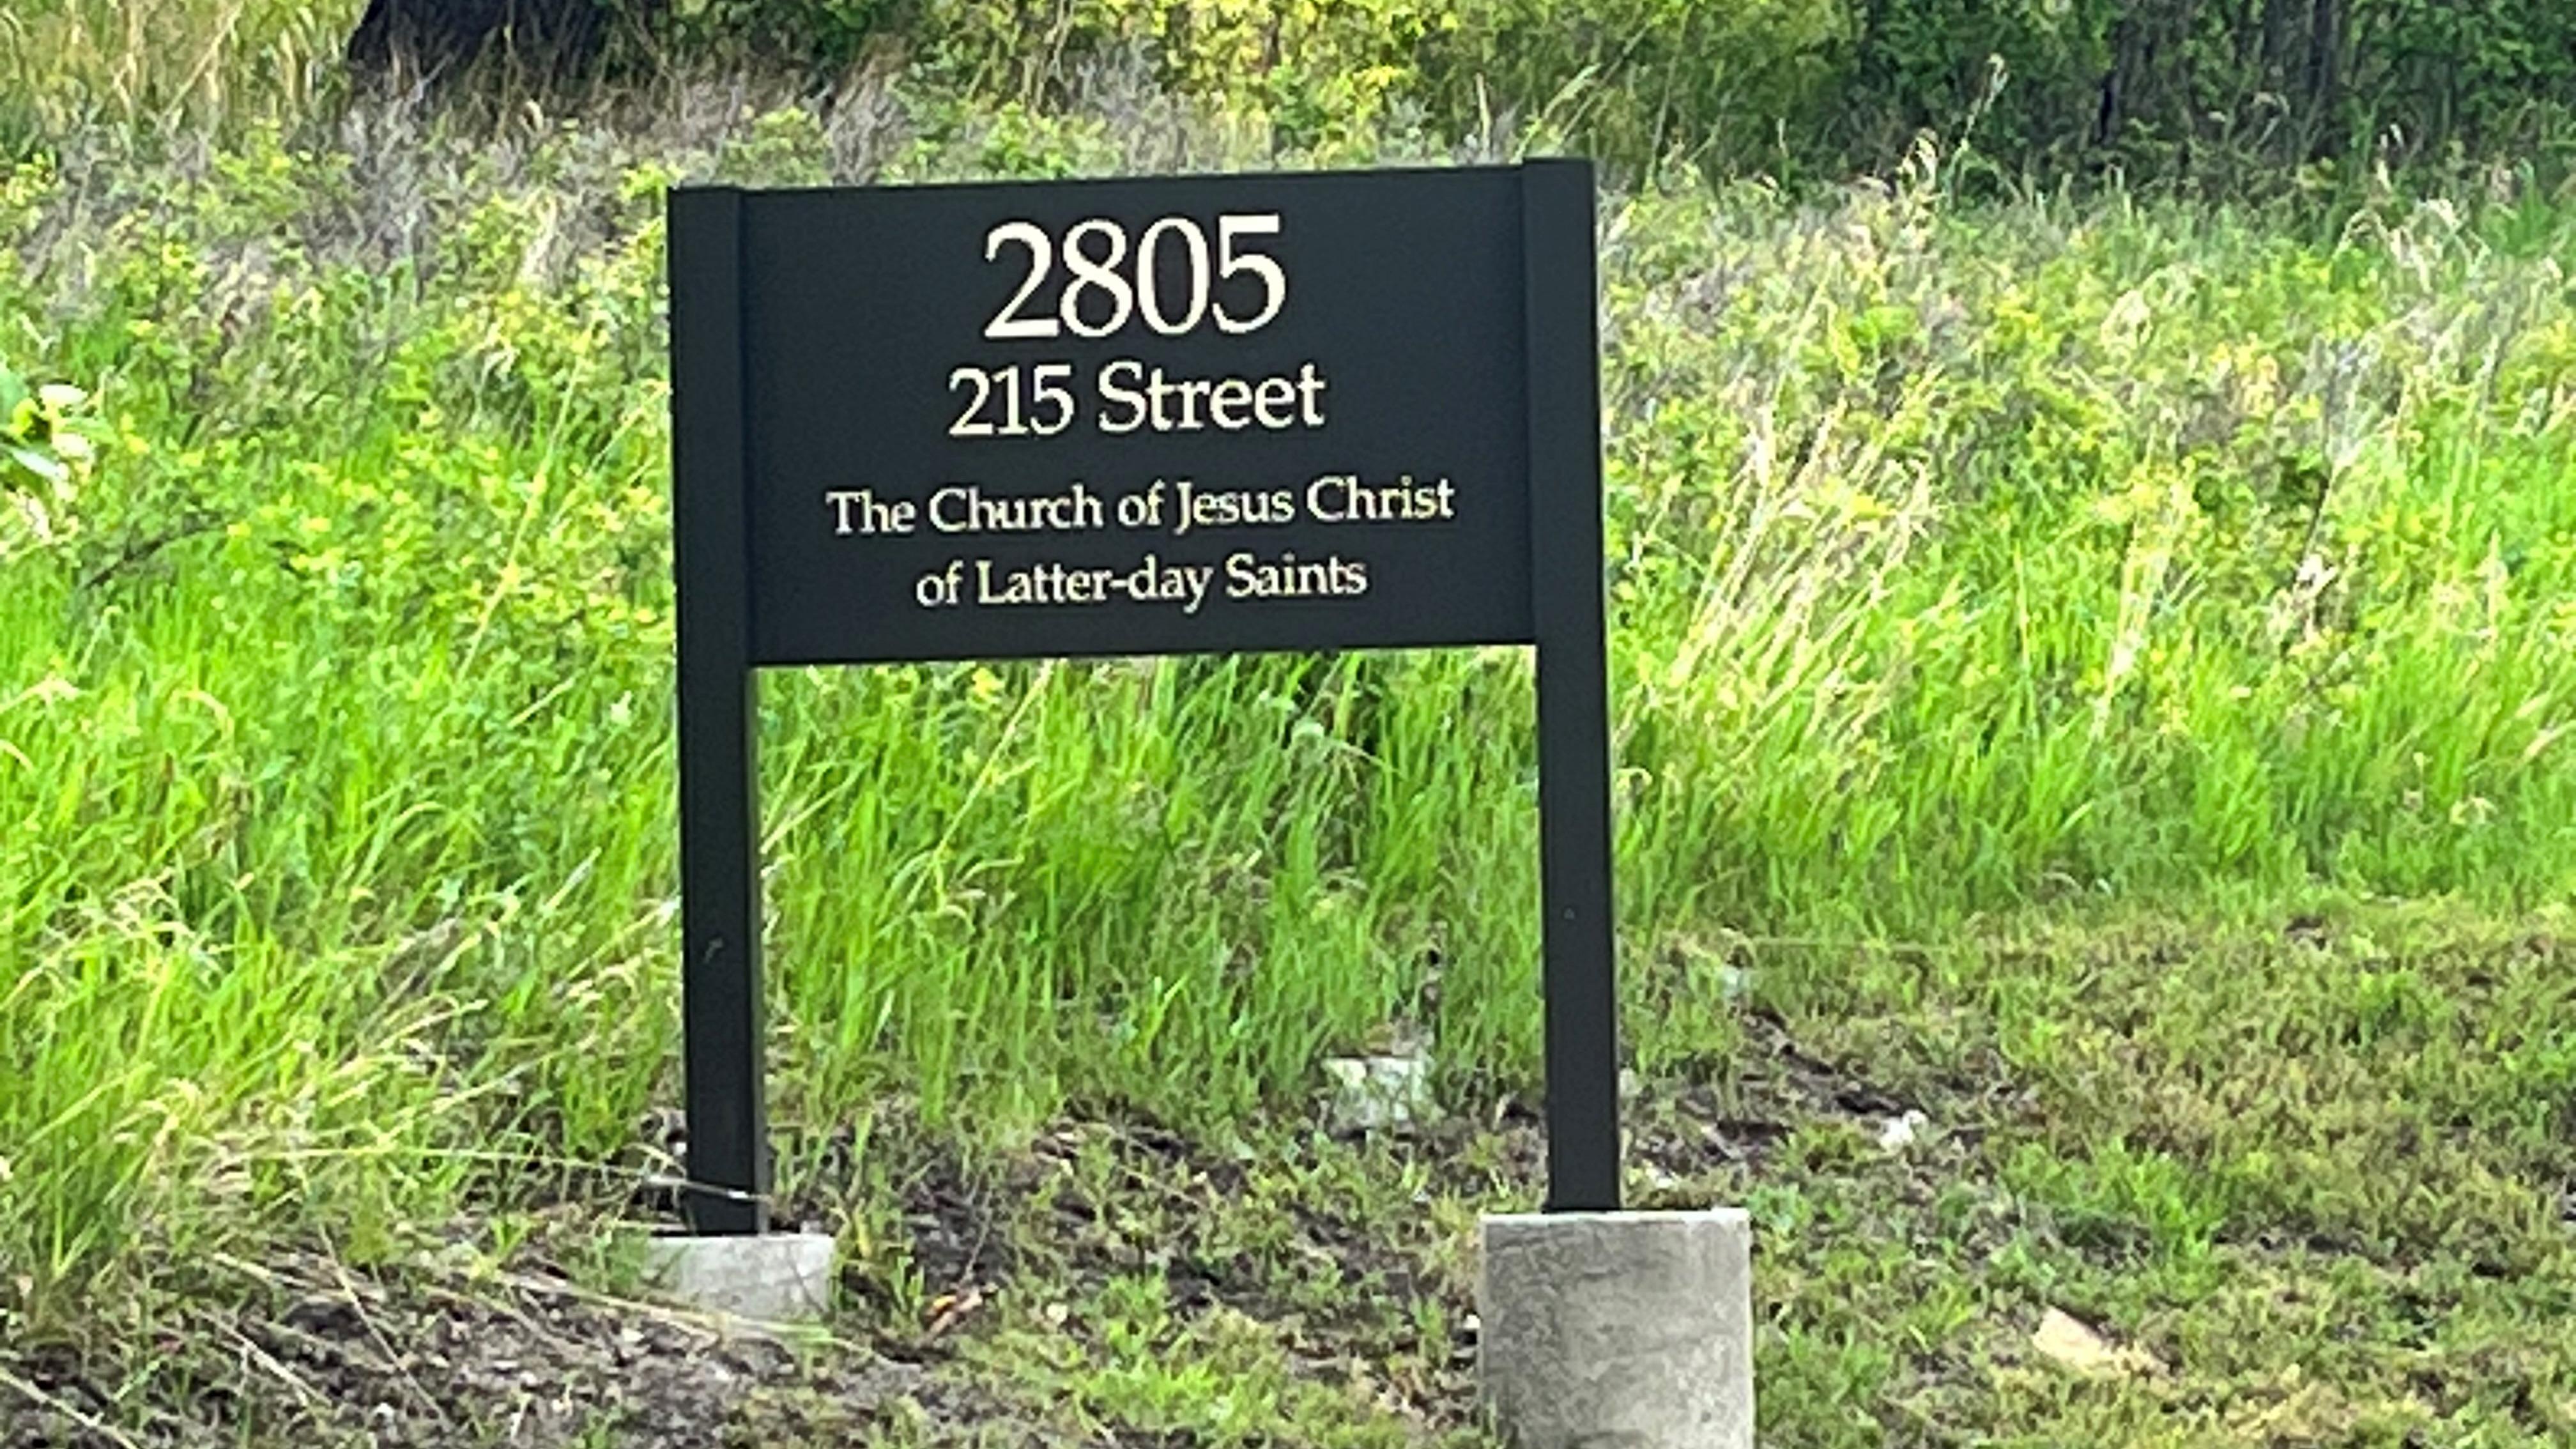 The Church of Jesus Christ of Latter-day Saints Belleview